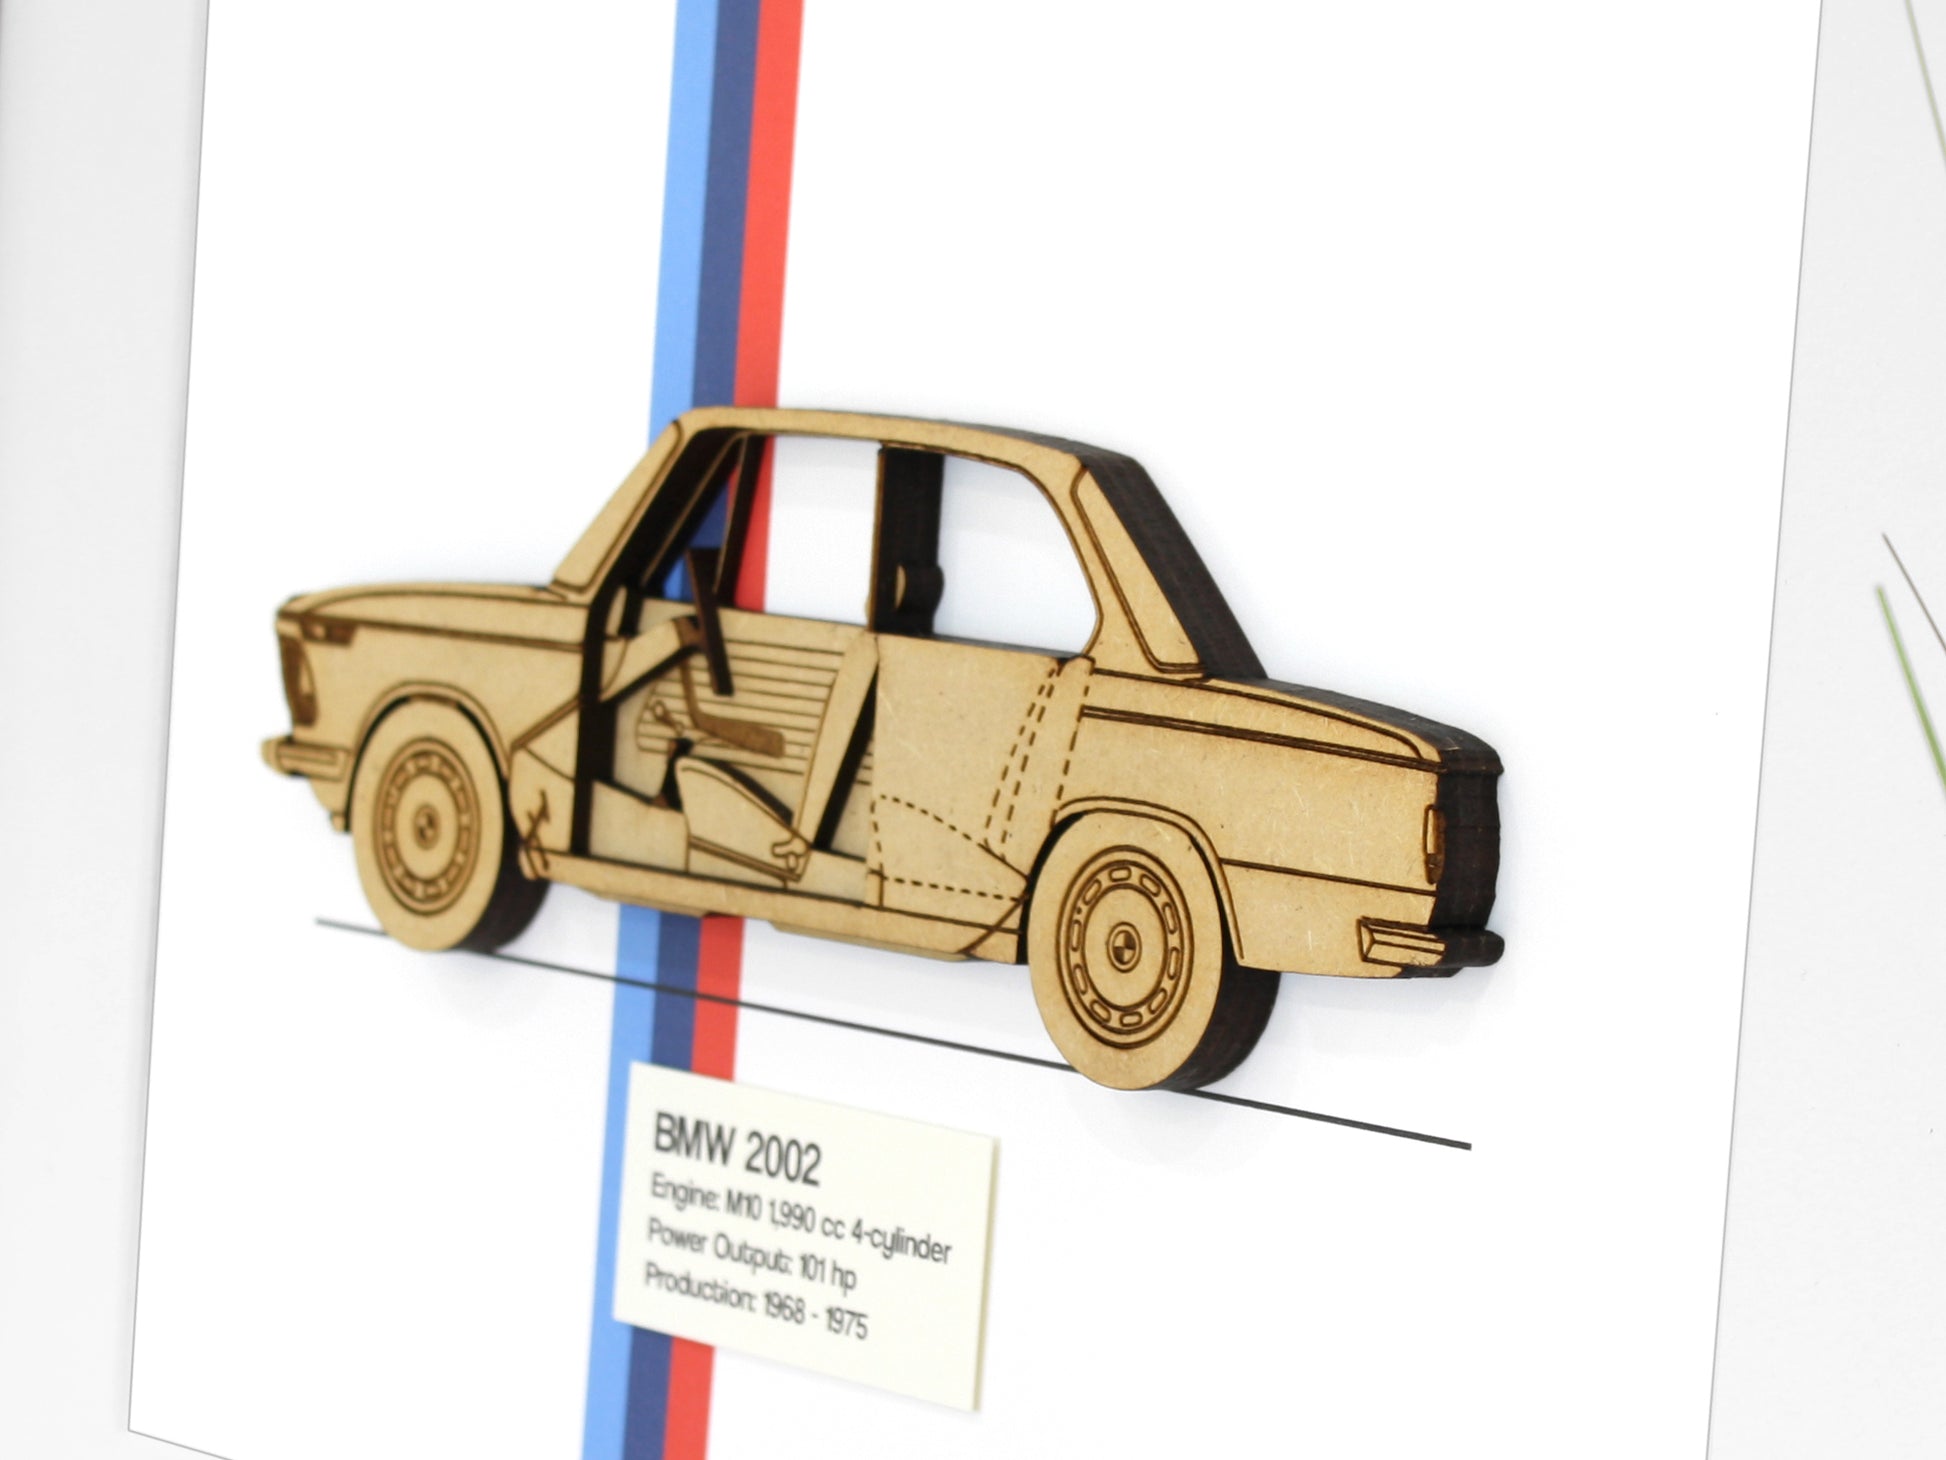 BMW 2002 gifts